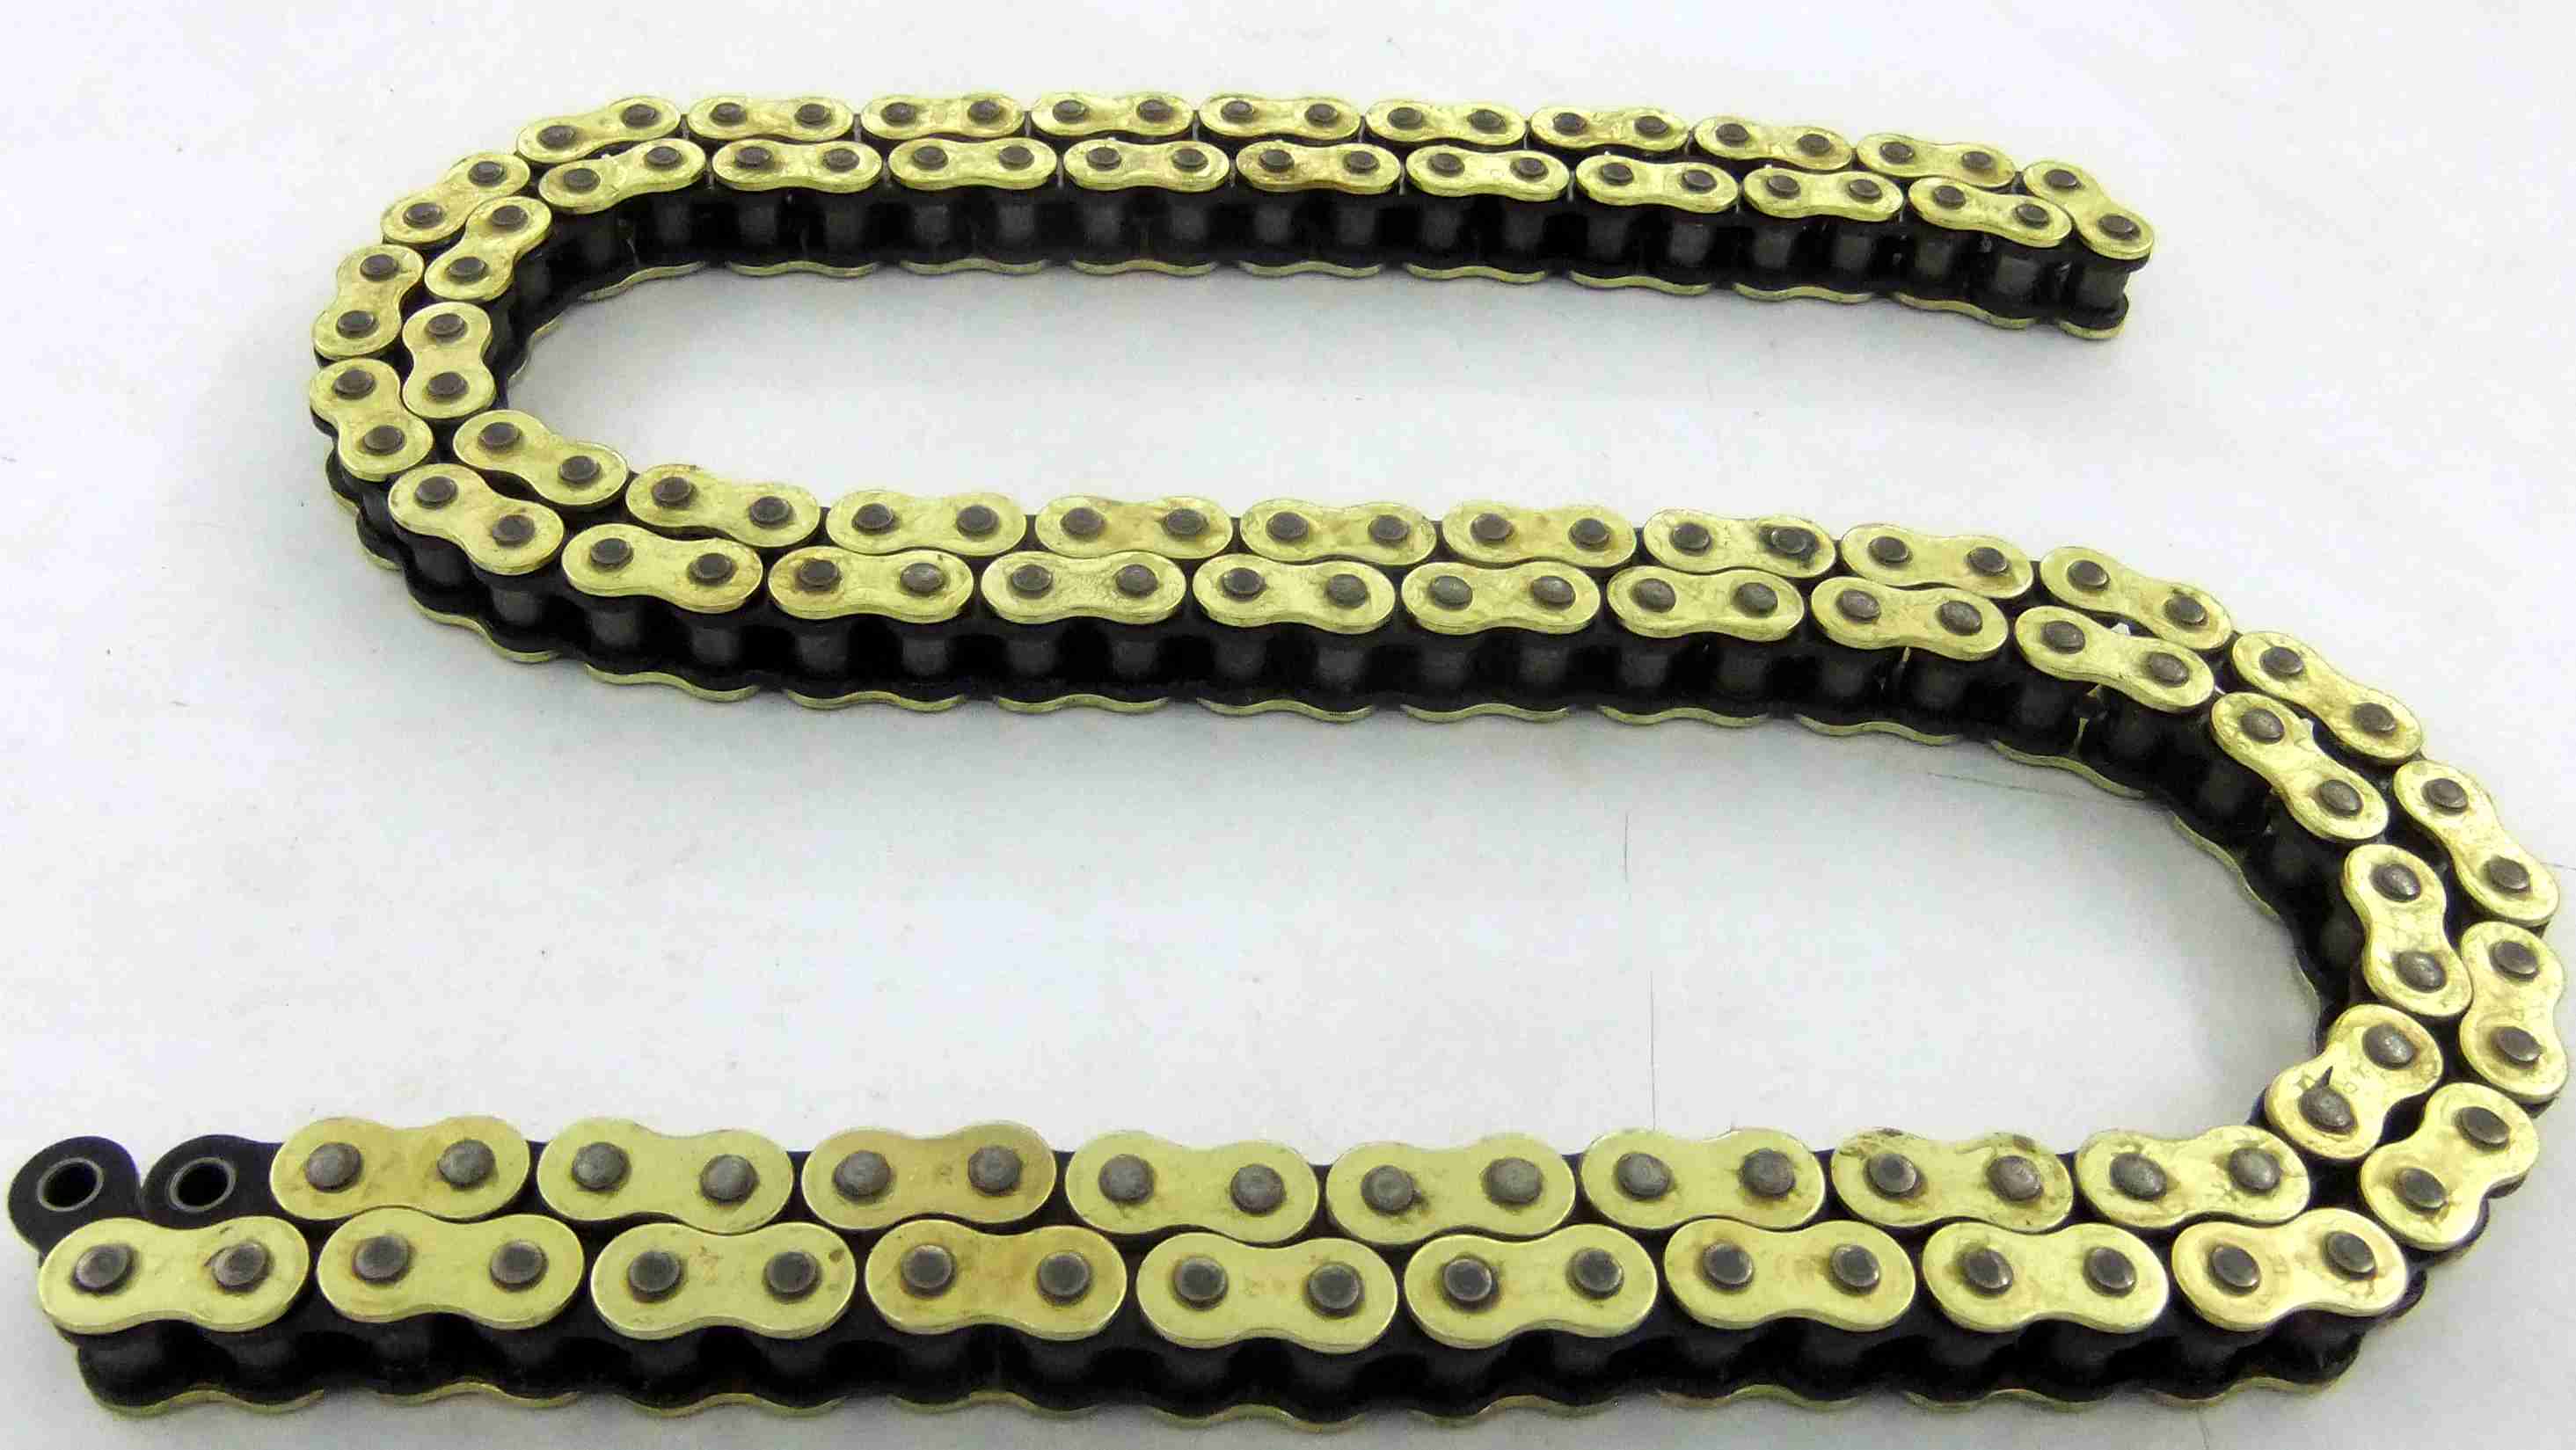 ENUMA CHAIN 415SHDR ULTRA-STRONG EXTRA-PREMIUM HIGH PERFORMANCE RACING CHAIN 124 LINKS/ROLLING GOLD